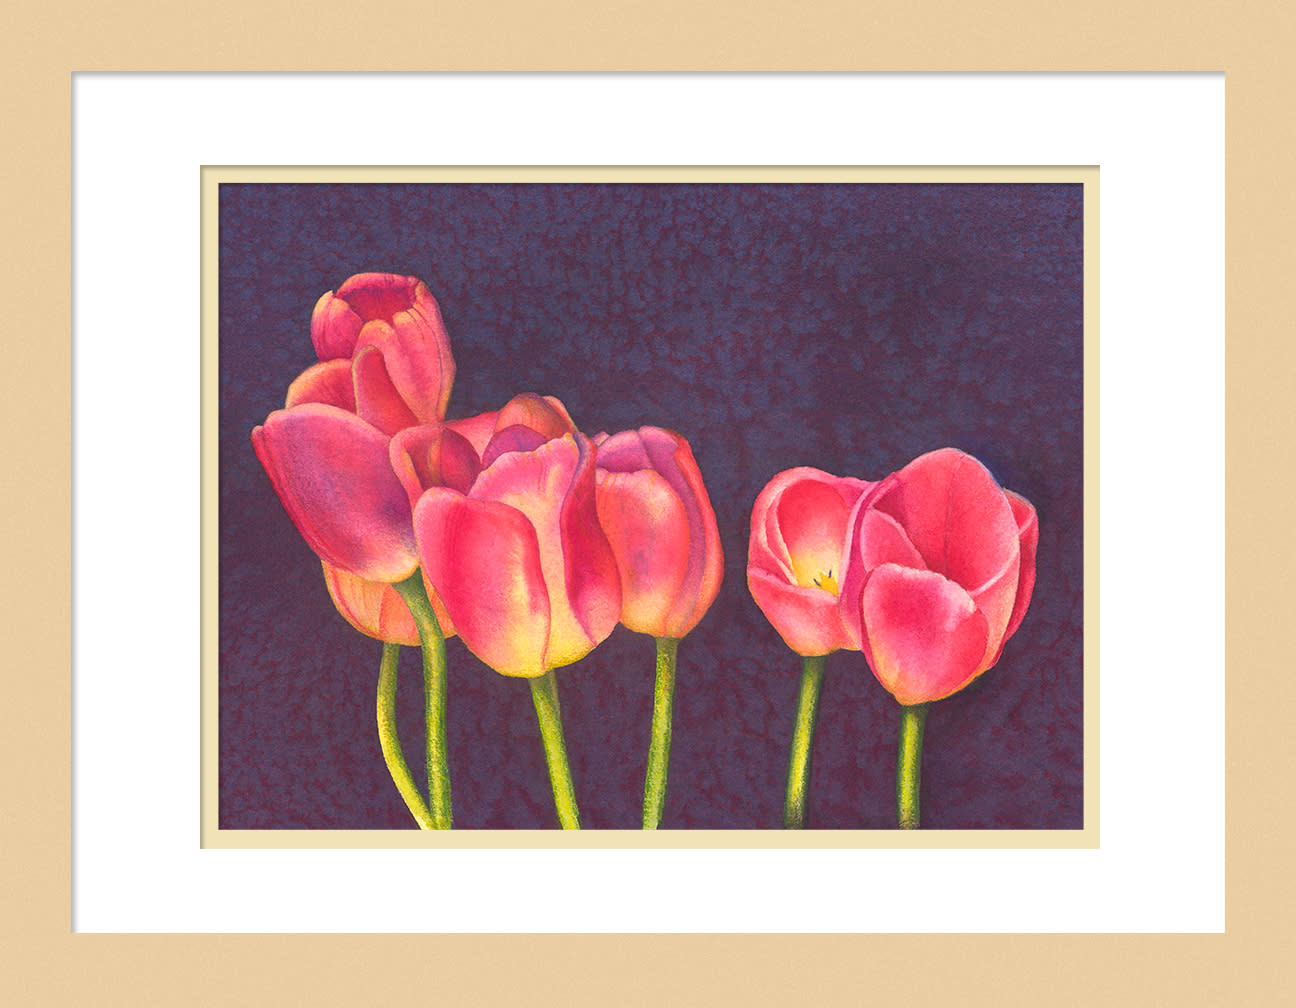 050201 red tulips on purple 9x12 framed to 12x16 m9lbah